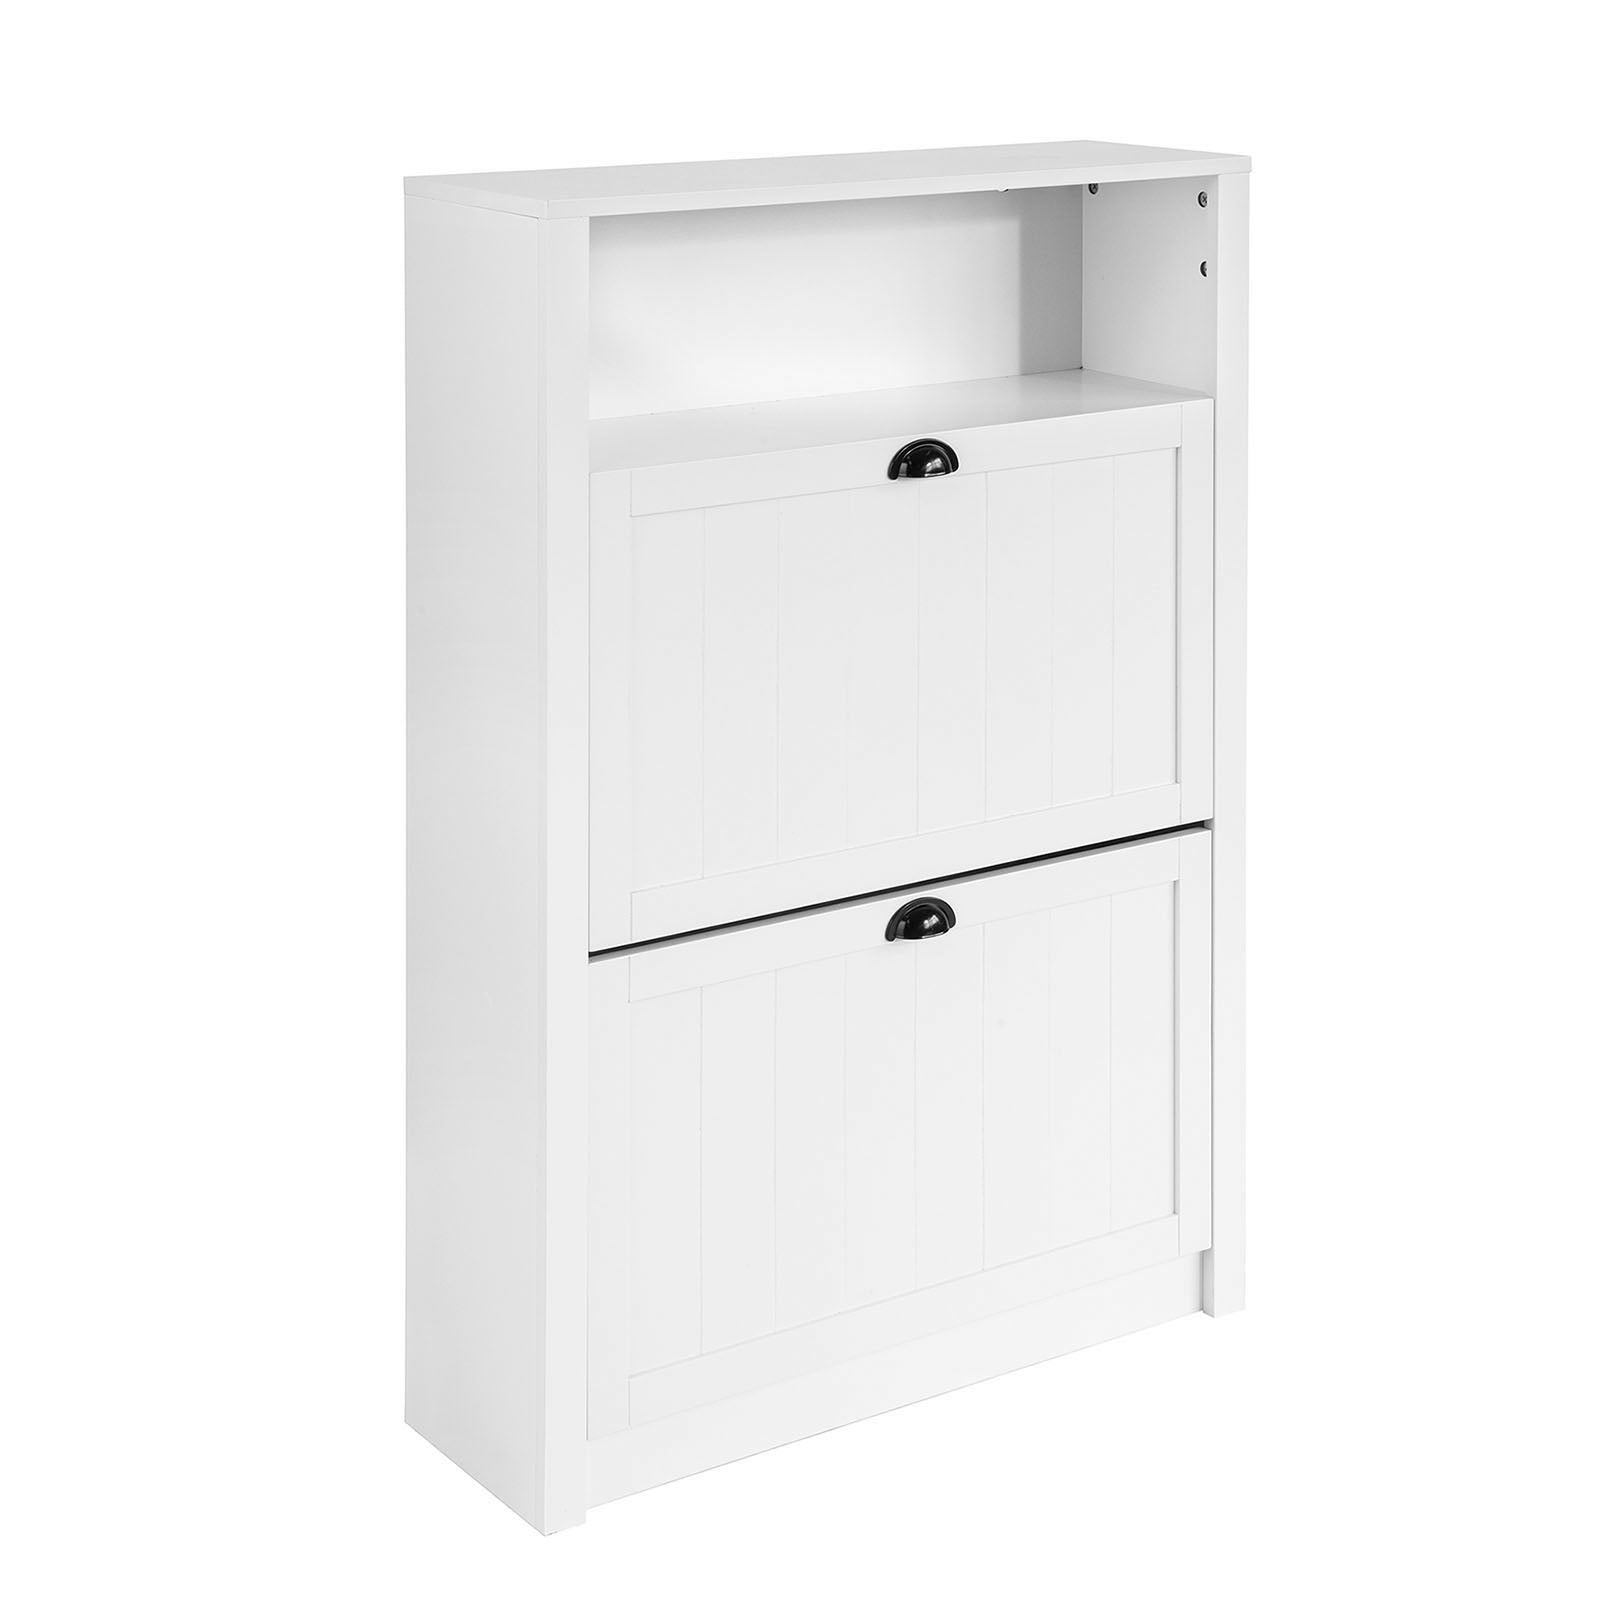 SoBuy FSR87-W, Shoe Cabinet Shoe Rack Shoe Cupboard with 1 Storage Compartment and 2 Drawers